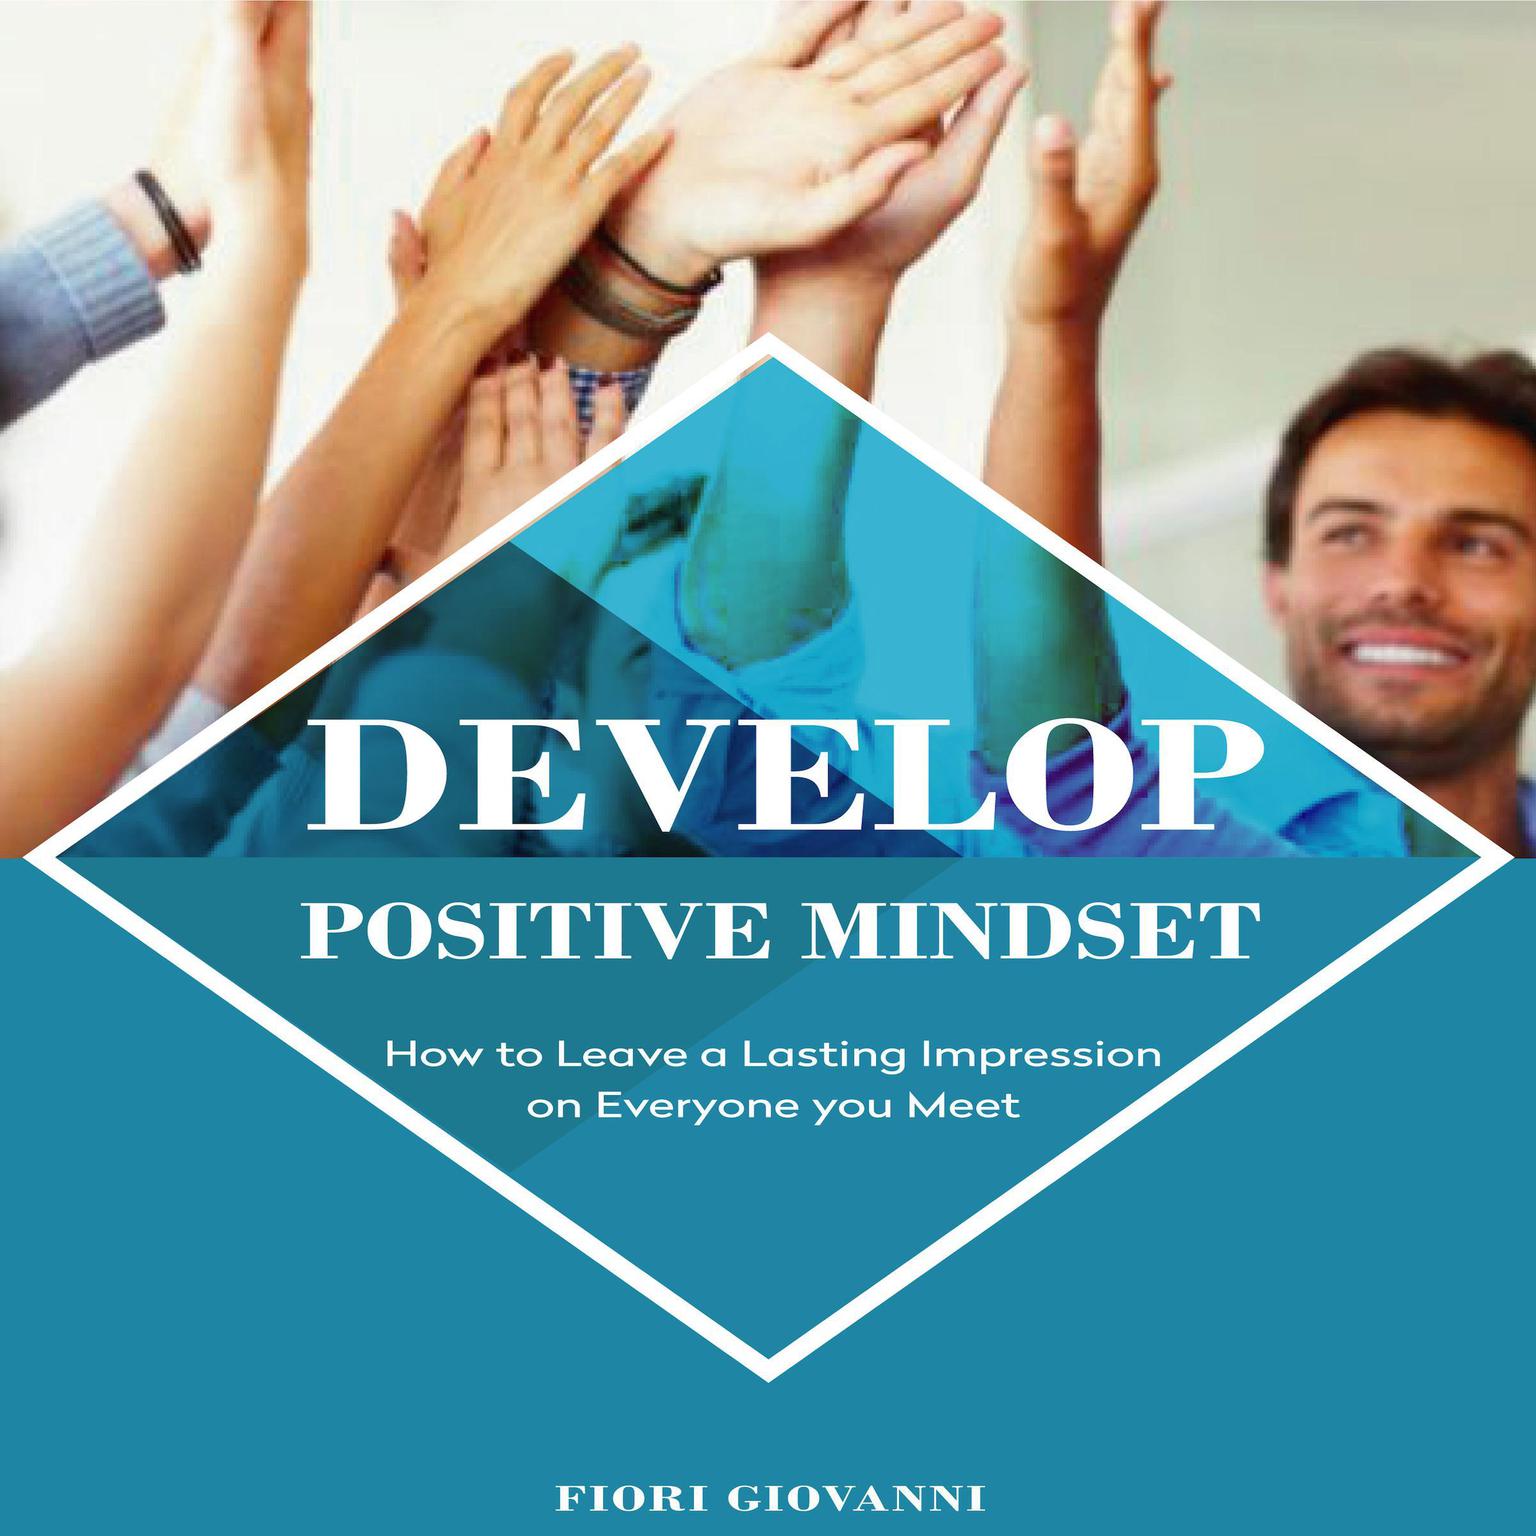 Develop Positive Mindset: How to Leave a Lasting Impression on Everyone You Meet Audiobook, by Fiori Giovanni